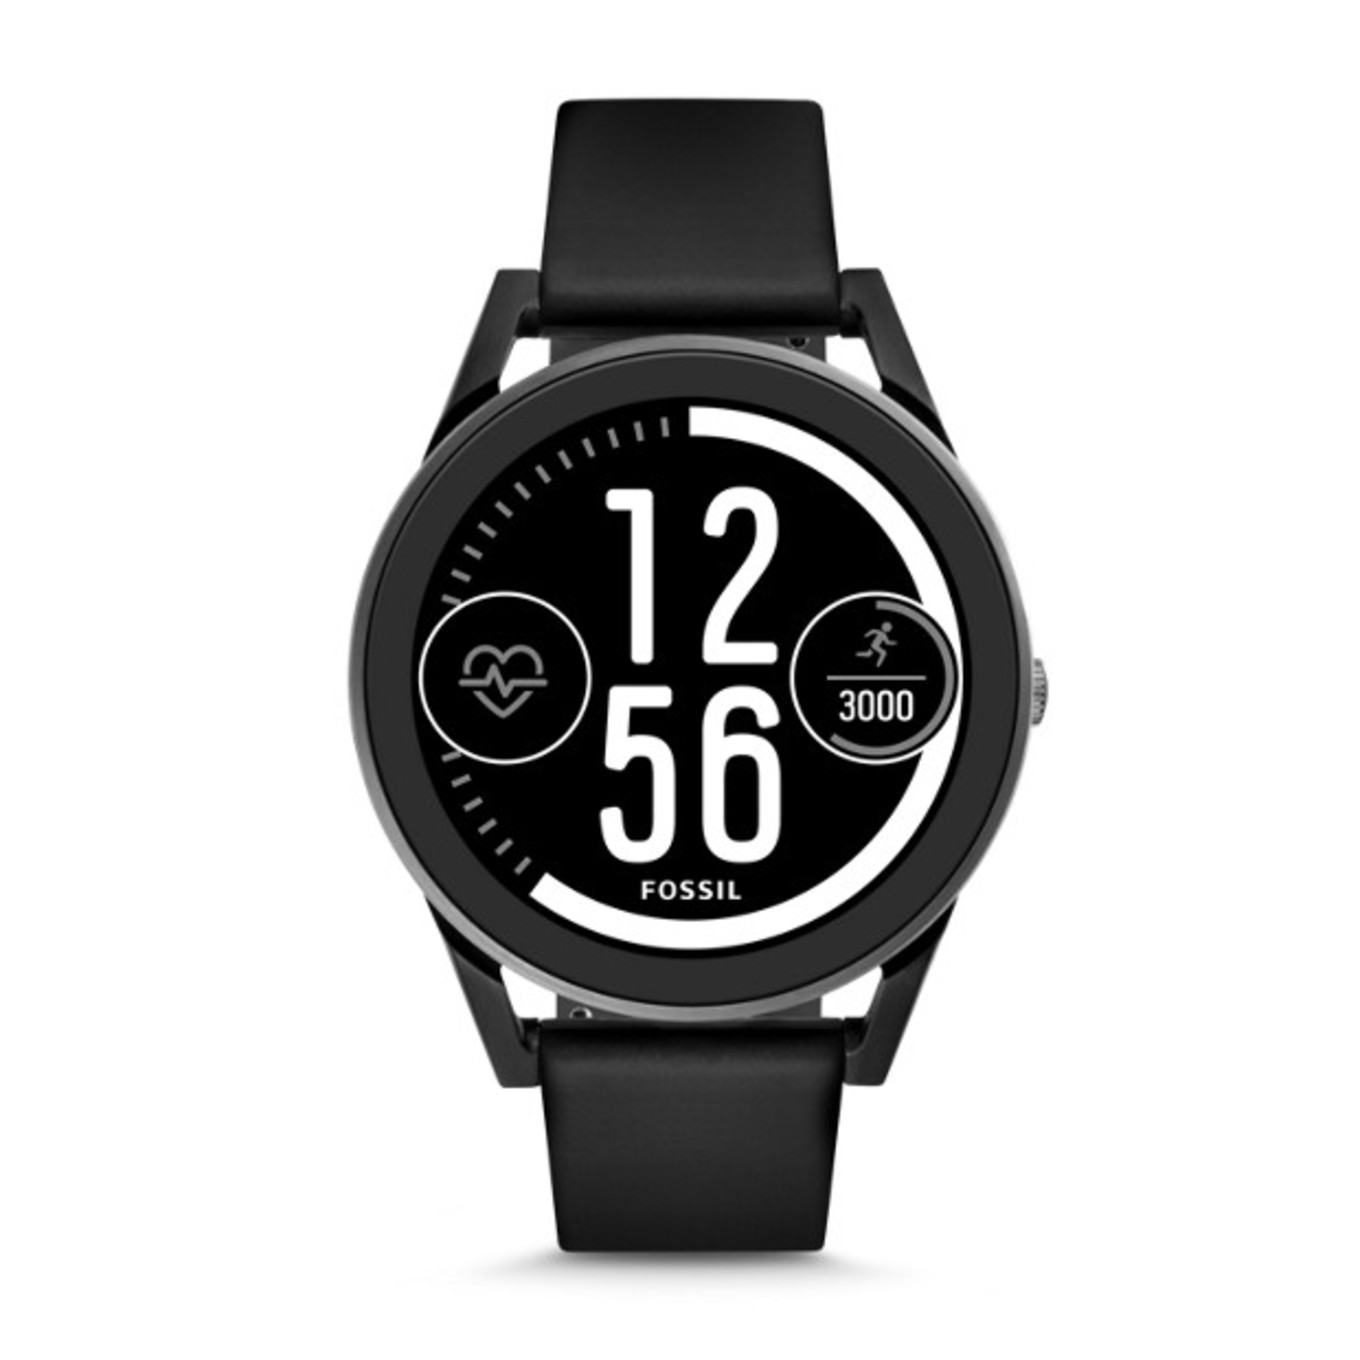 Смарт часы Fossil q. Fossil q Android. Fossil me3000. Часы Fossil ftw4036. Q control